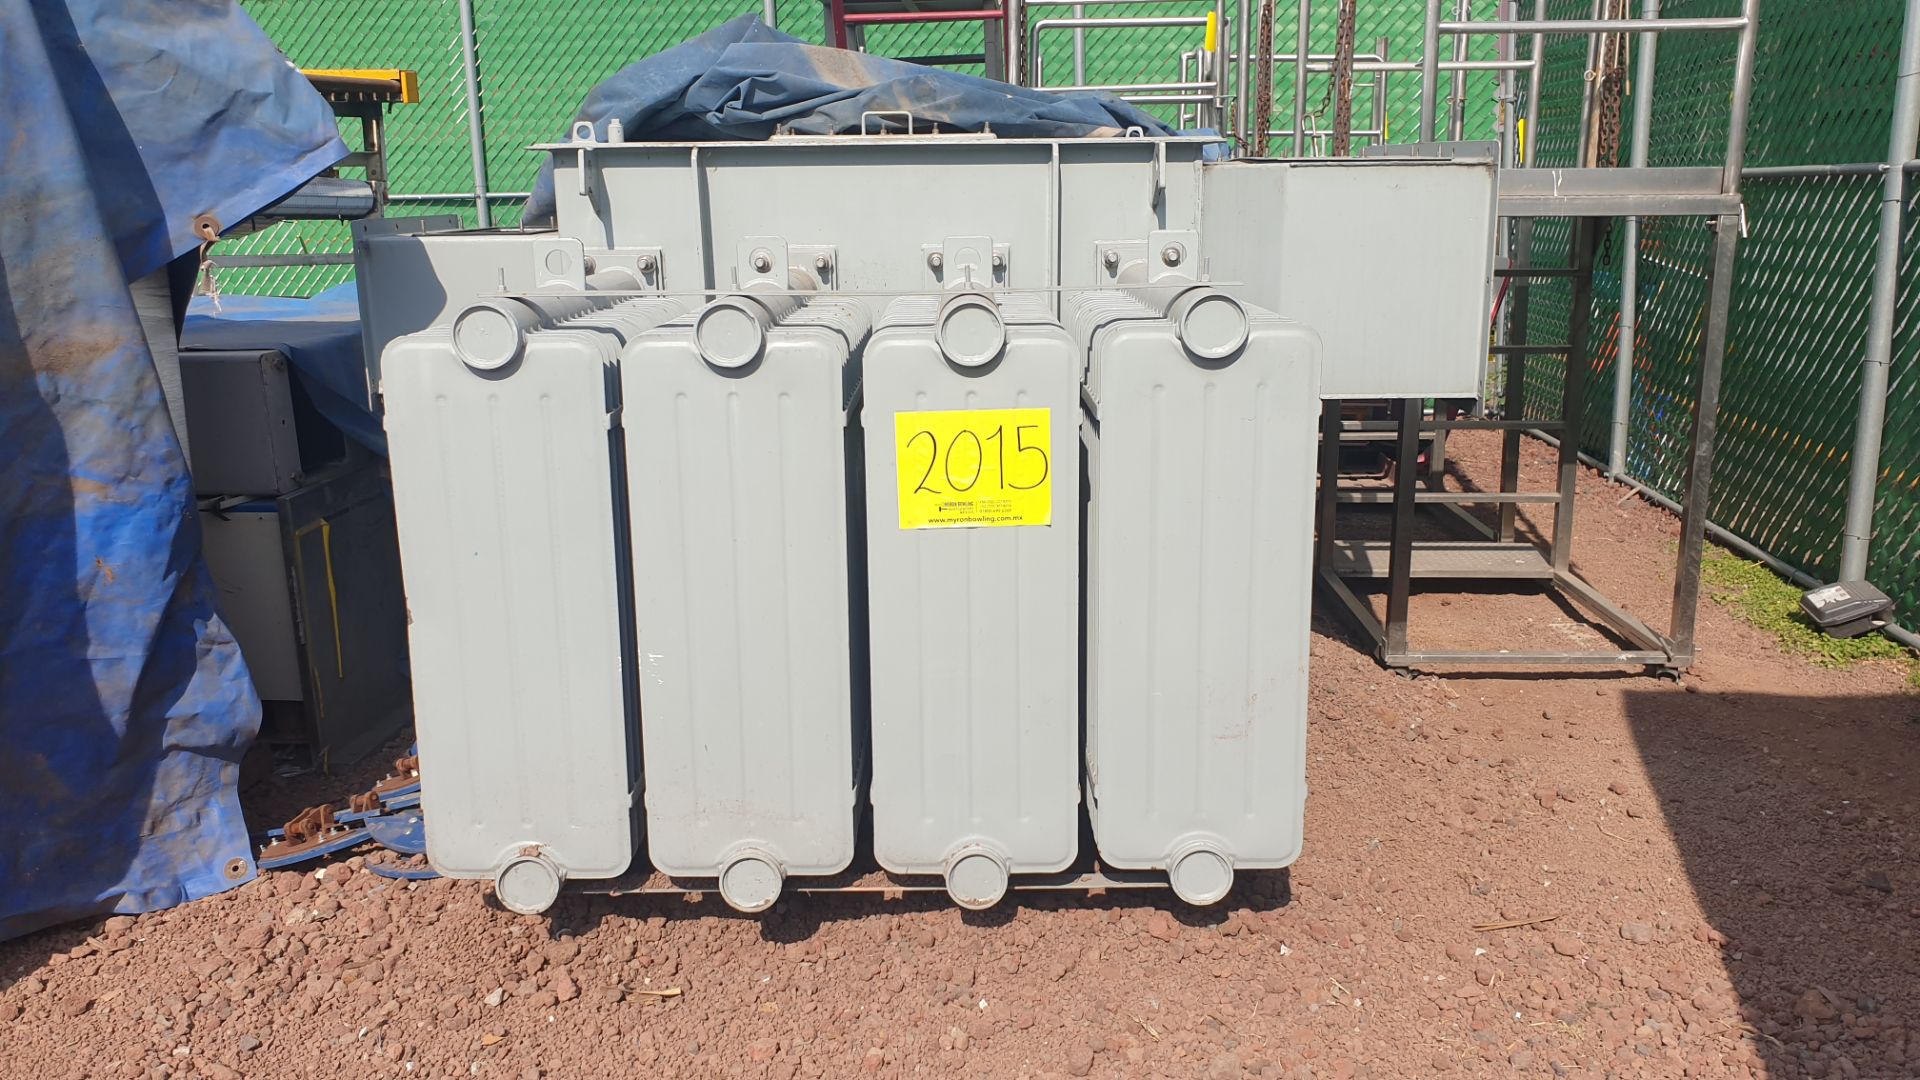 1 PROLEC Transformer in oil of 2000KVA - Image 2 of 17